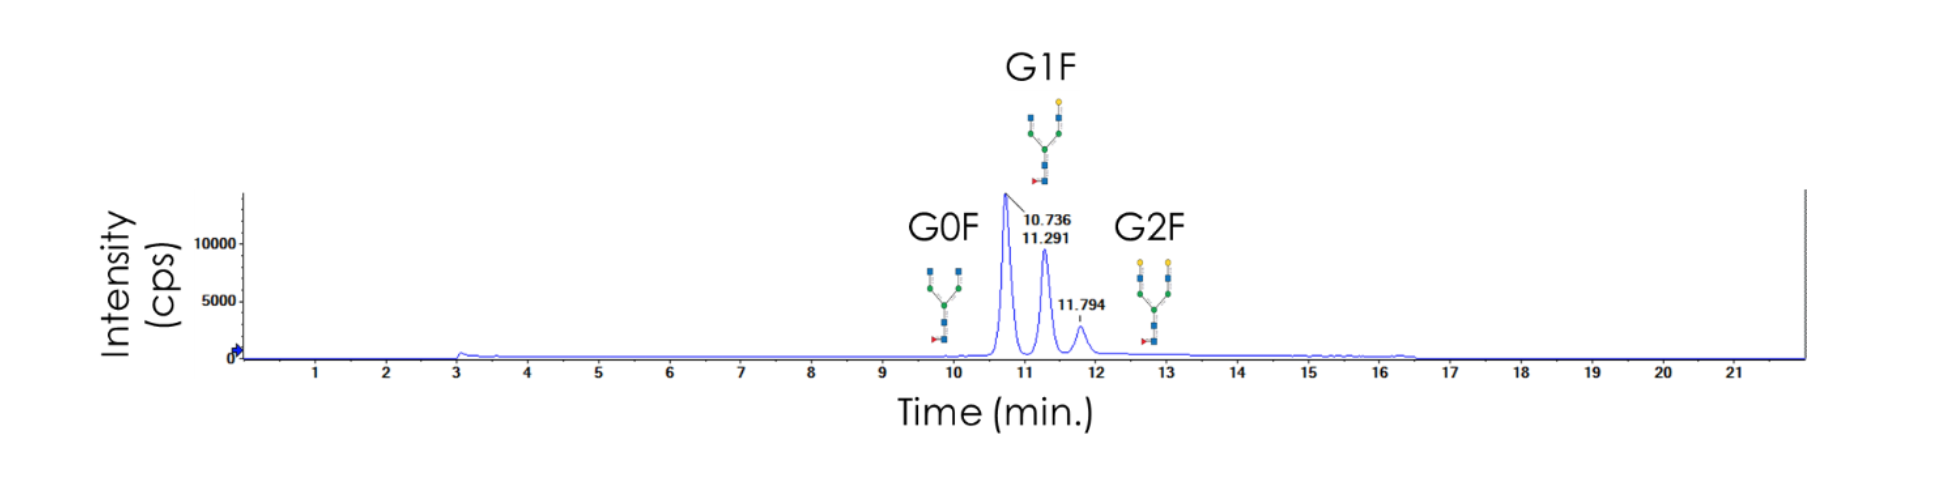 Line graph with Intensity (cps) on the y-axis from 0-10000 in increments of 5000 cps and time (min) on the x-axis from 0-21 in increments of 1 min. The protein is deglycosylated and high intensity peaks indicate the glycoform(s) that was/were released from the protein.